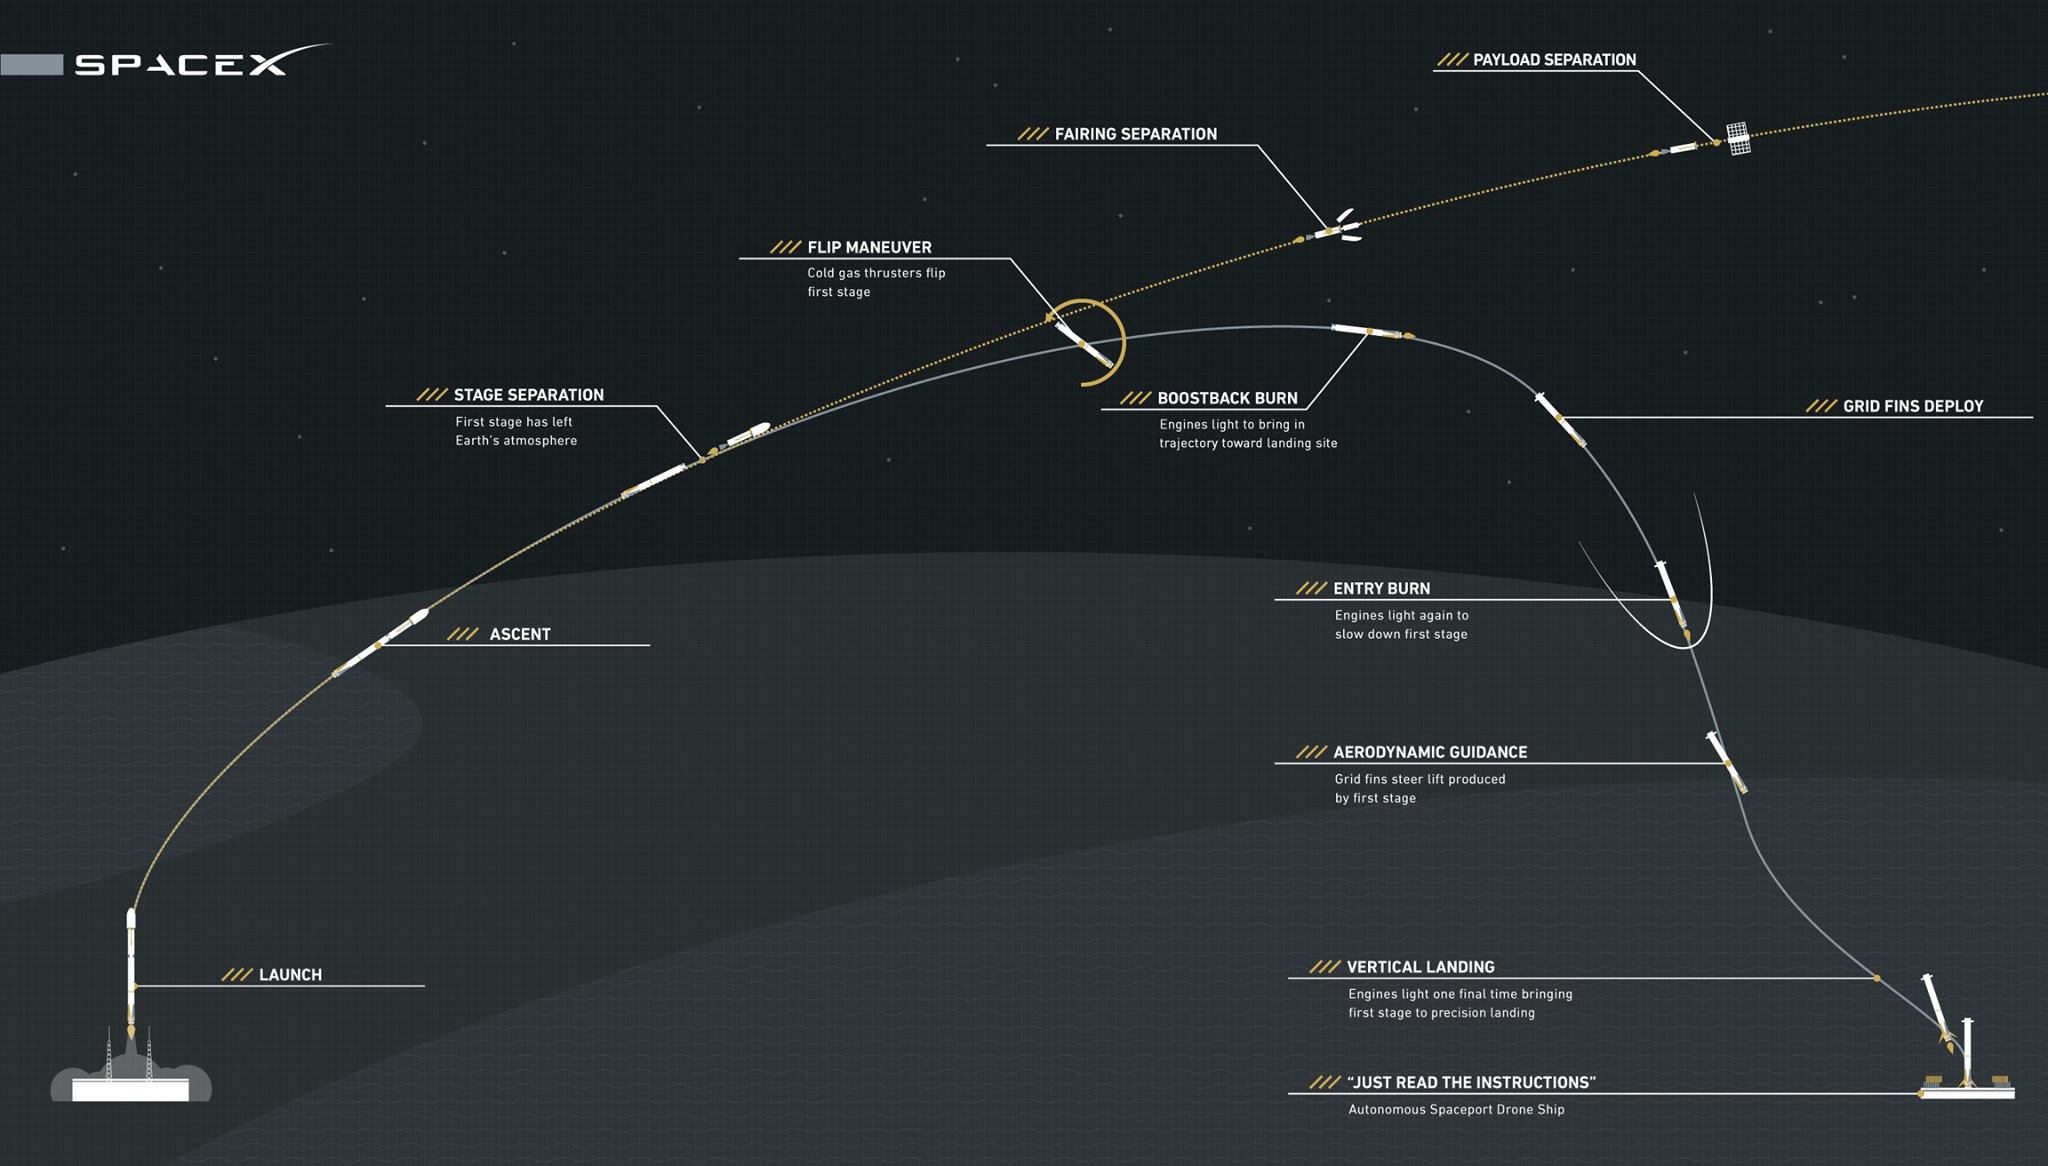 ASDS landing profile for the SpaceX Falcon-9 booster. Image Credit: SpaceX